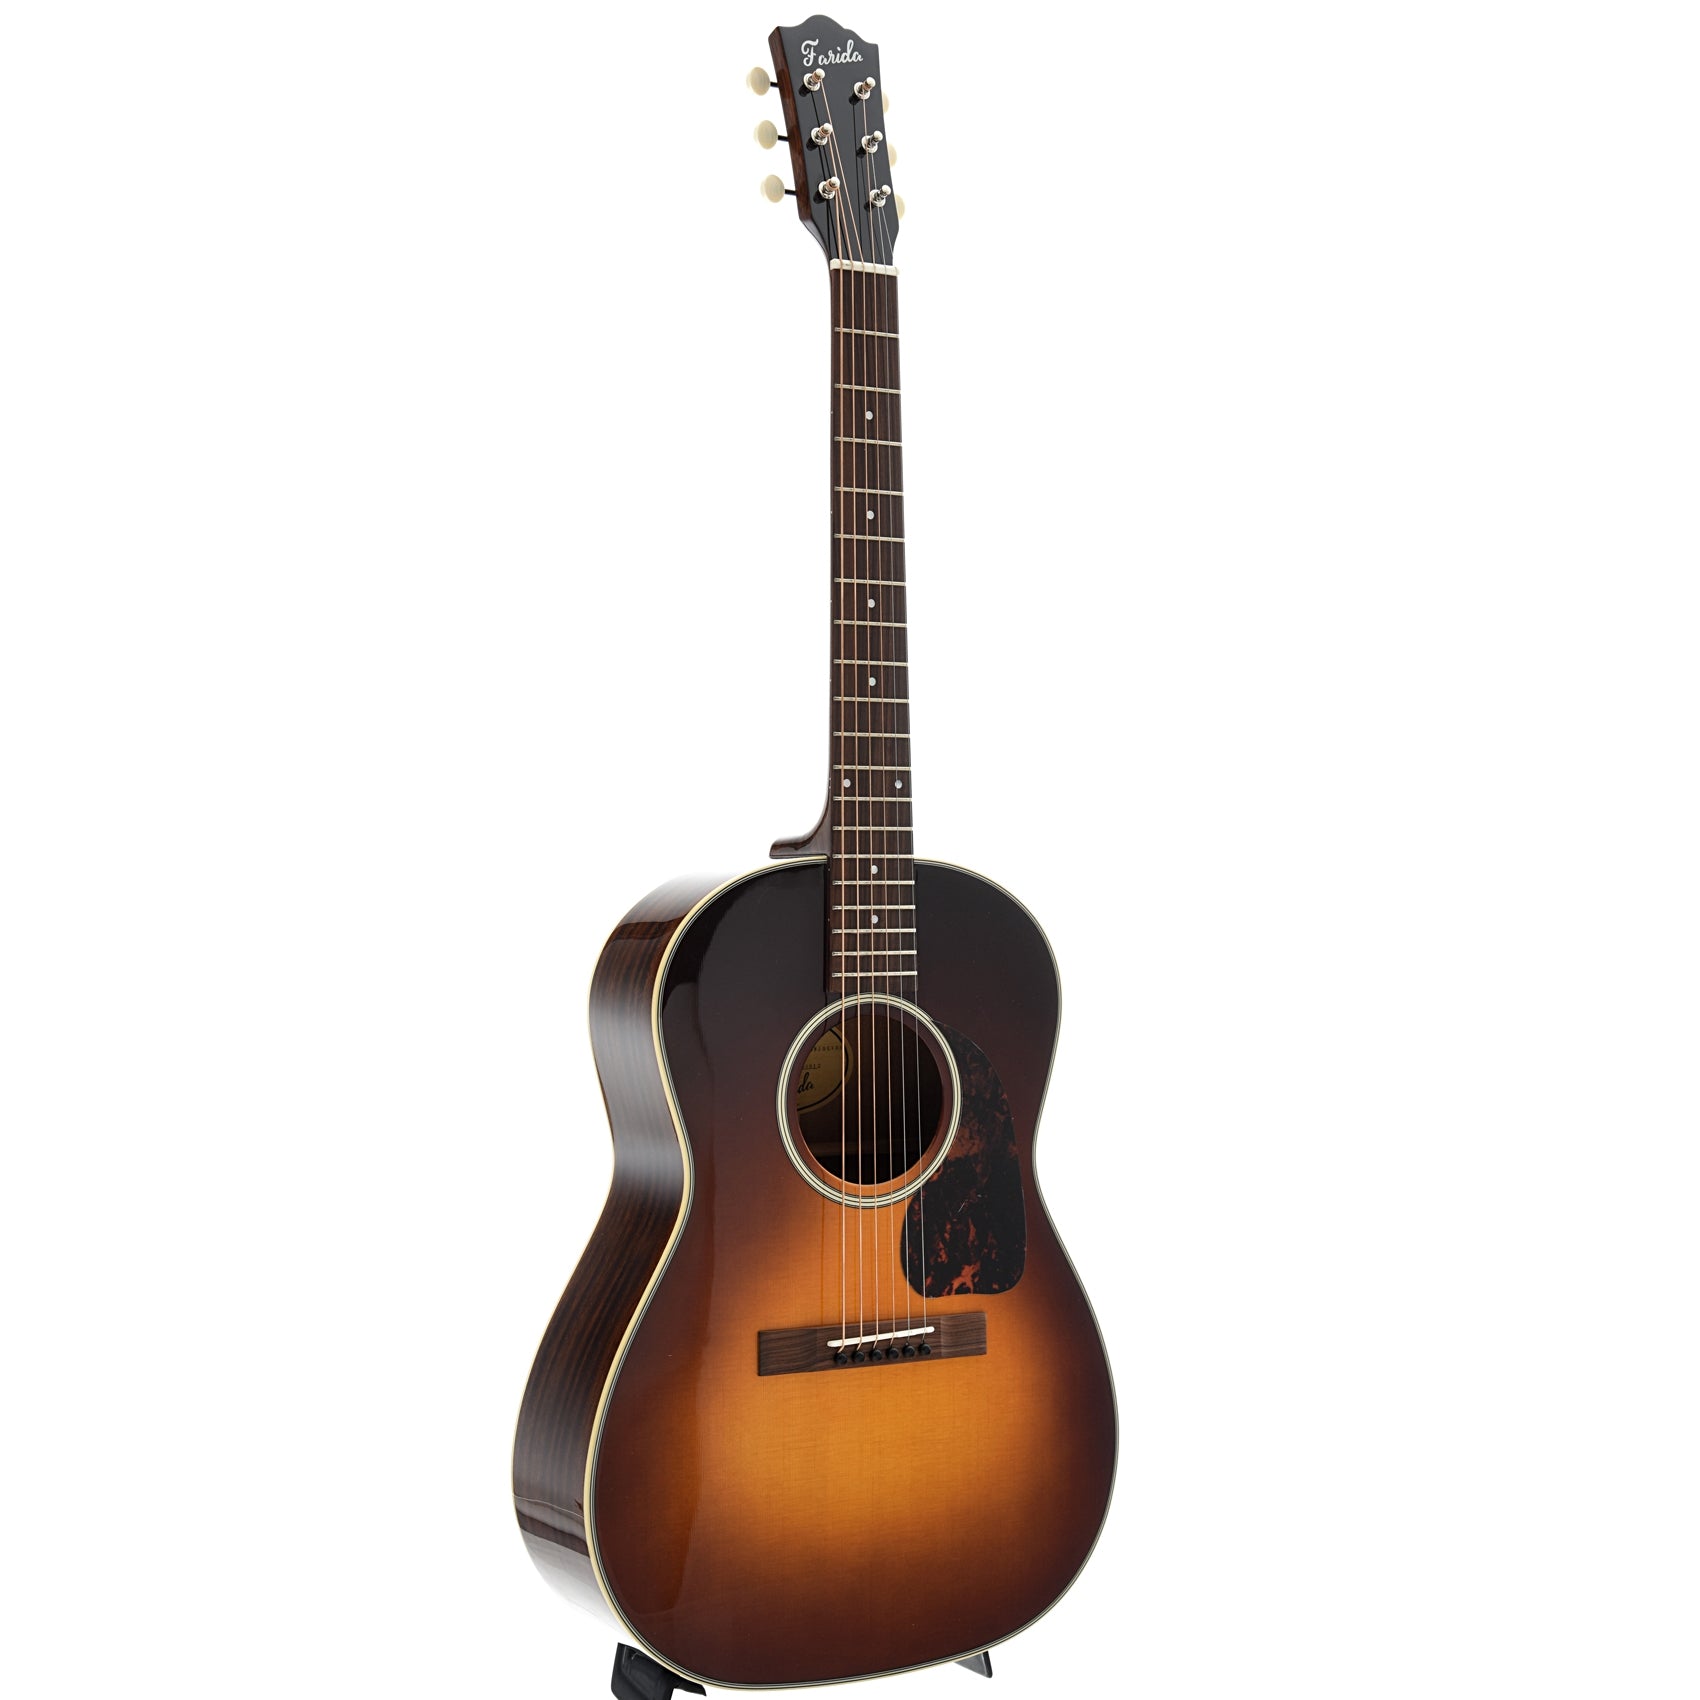 Farida Old Town Series OT-25 Wide VBS Acoustic Guitar – Elderly 